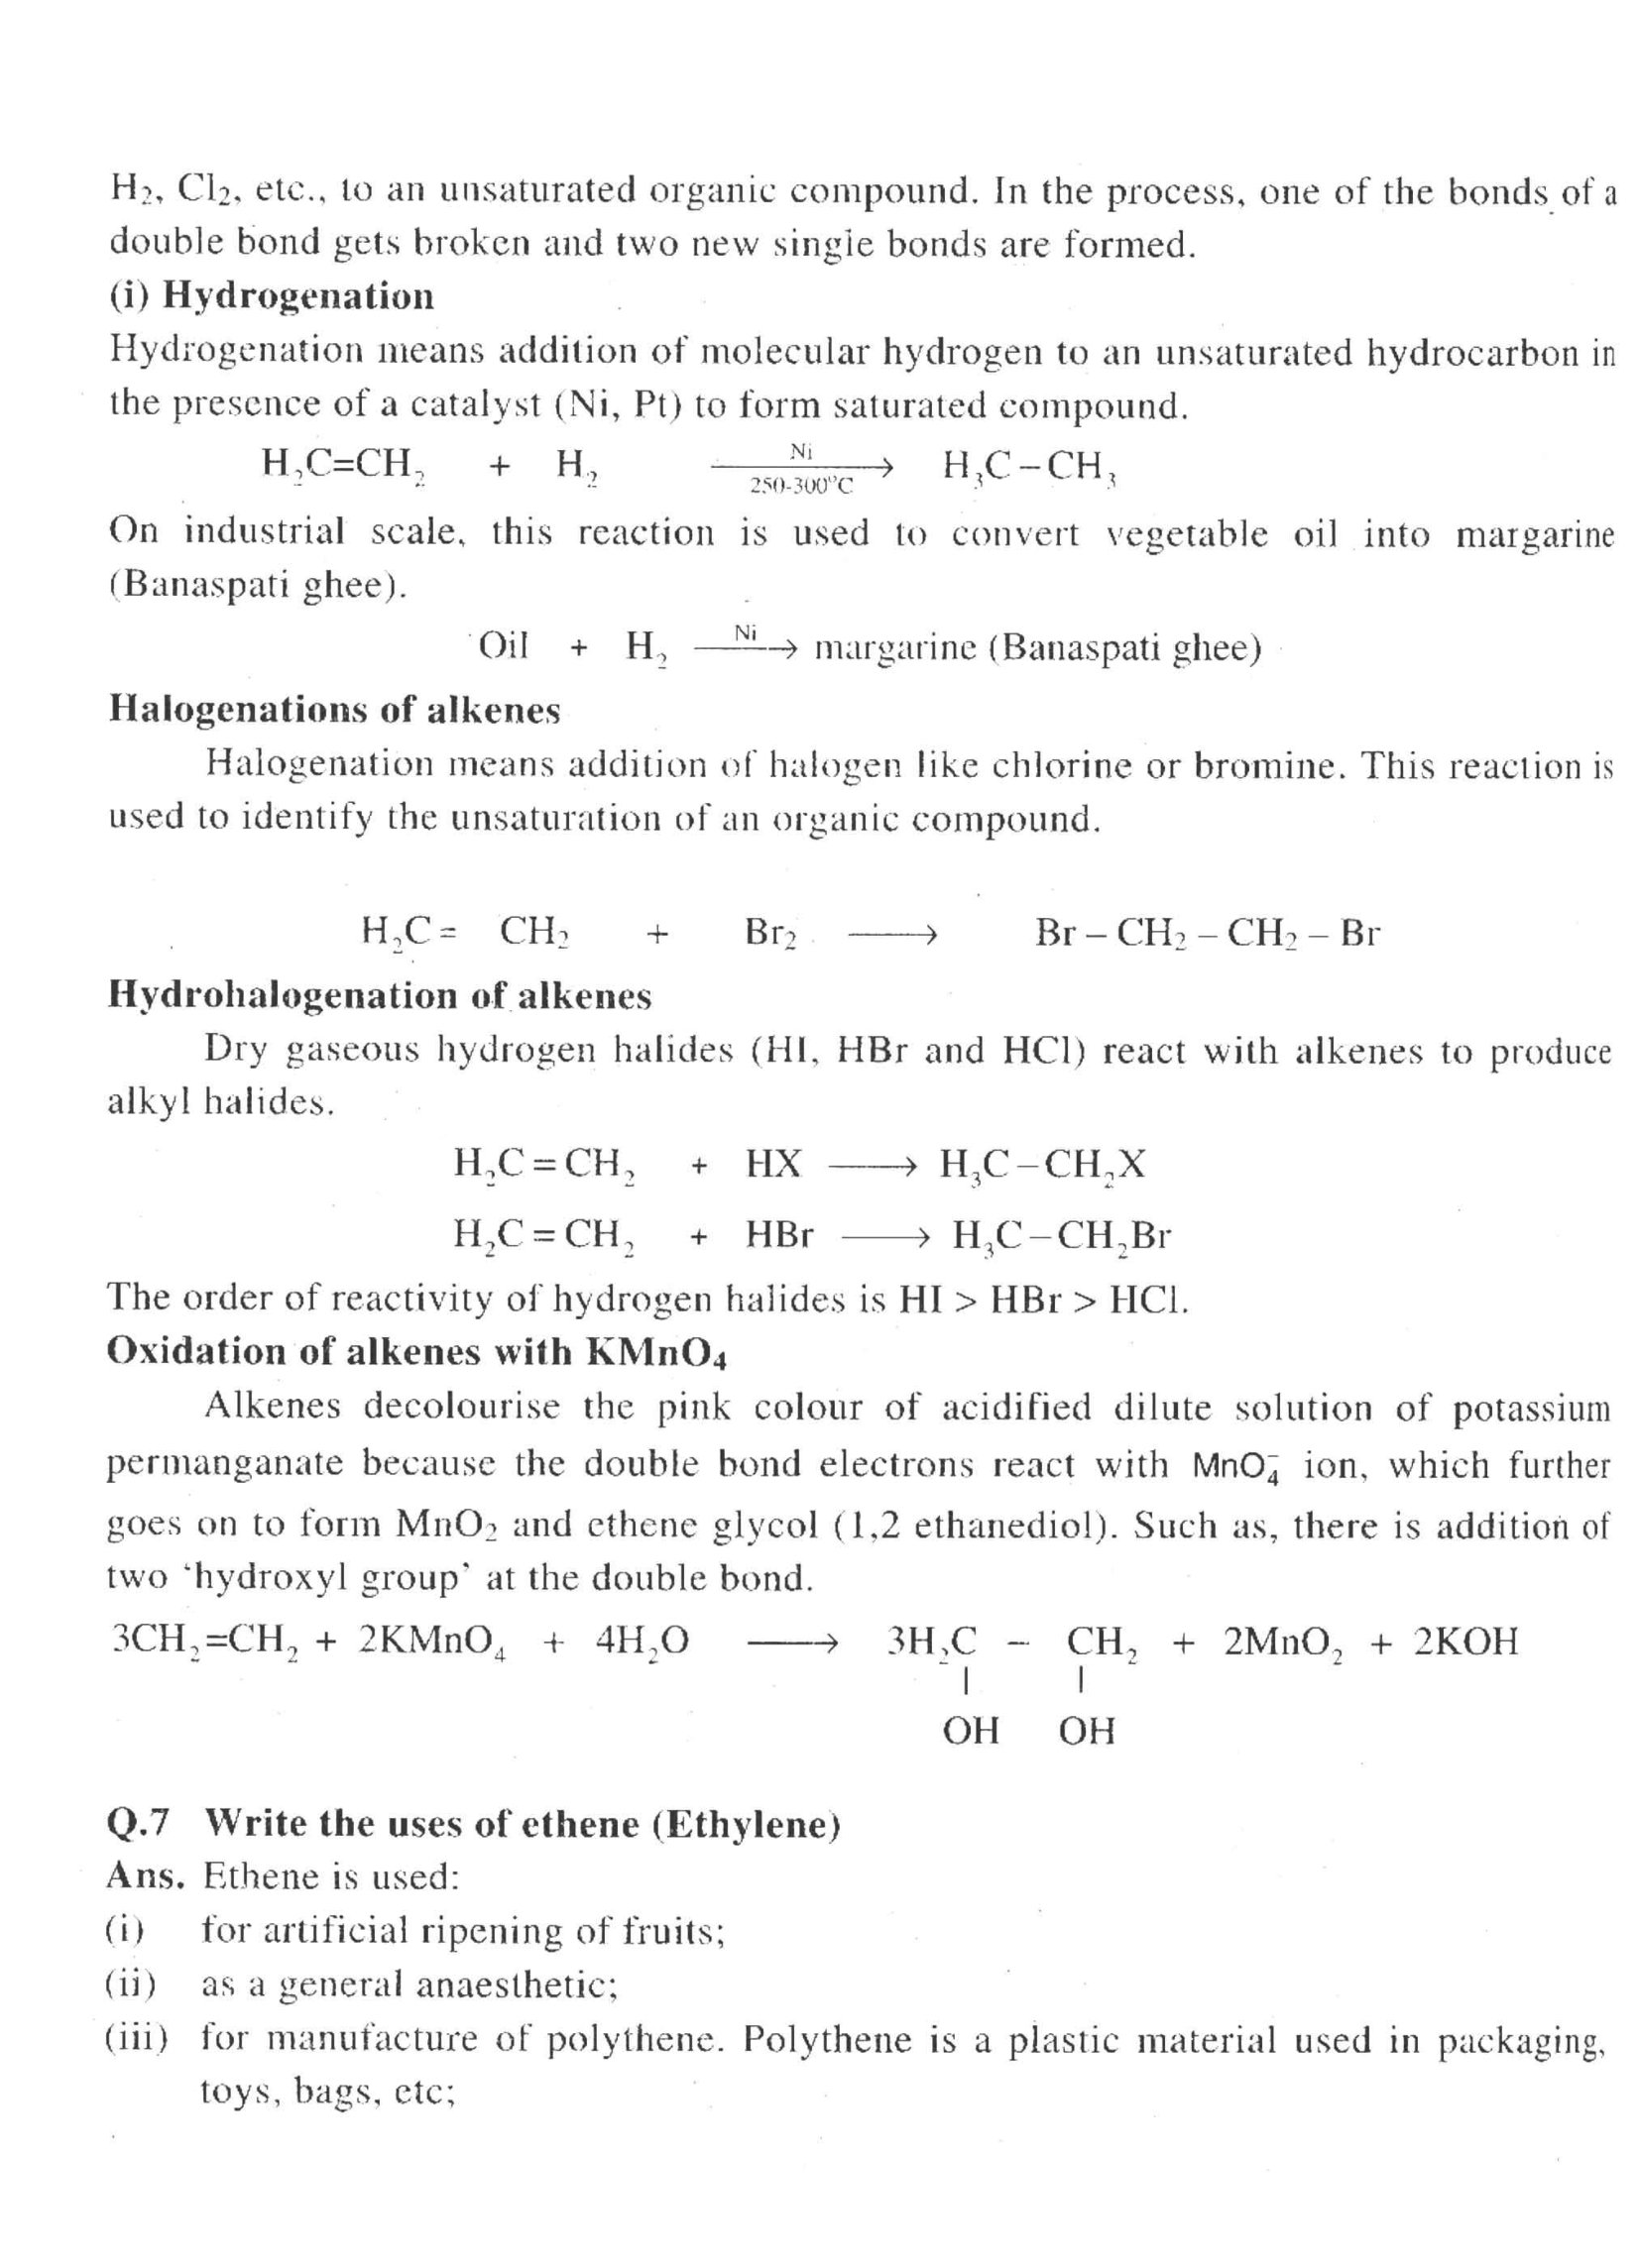 Chapter 4 Notes  10th Class Chemistry  Chapter Name: Hydrocarbons {Long Question Answers}